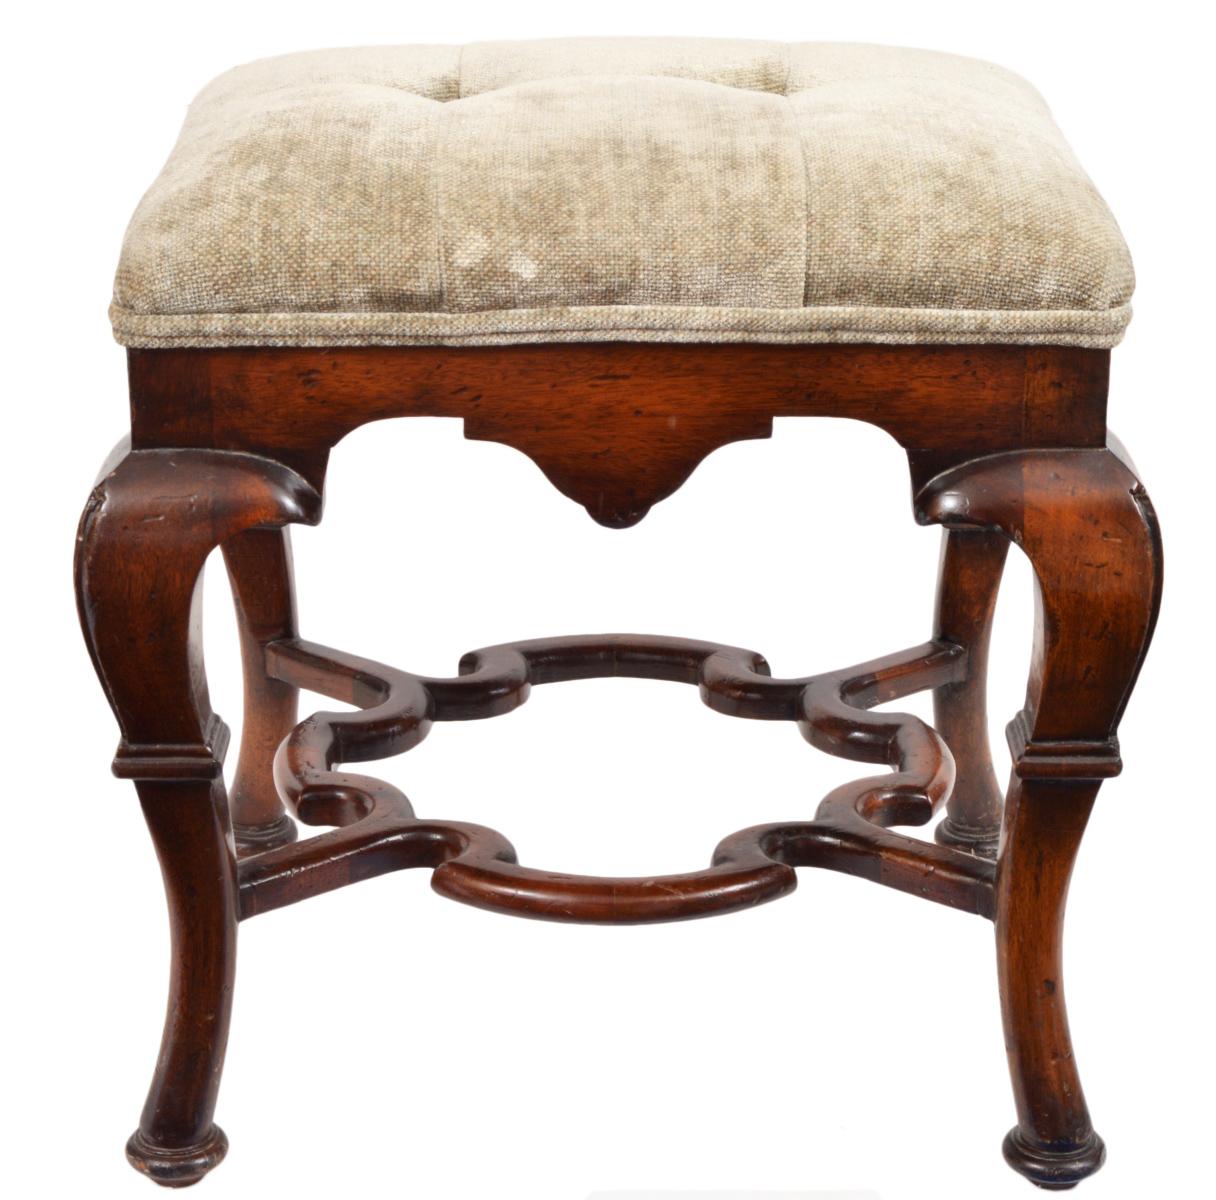 This pair of Spanish colonial style benches or ottomans feature a great sculptural form with robust cabriole legs joined by beautiful carved and shaped stretchers centering an inner partly circular space. The are upholstered and covered with a